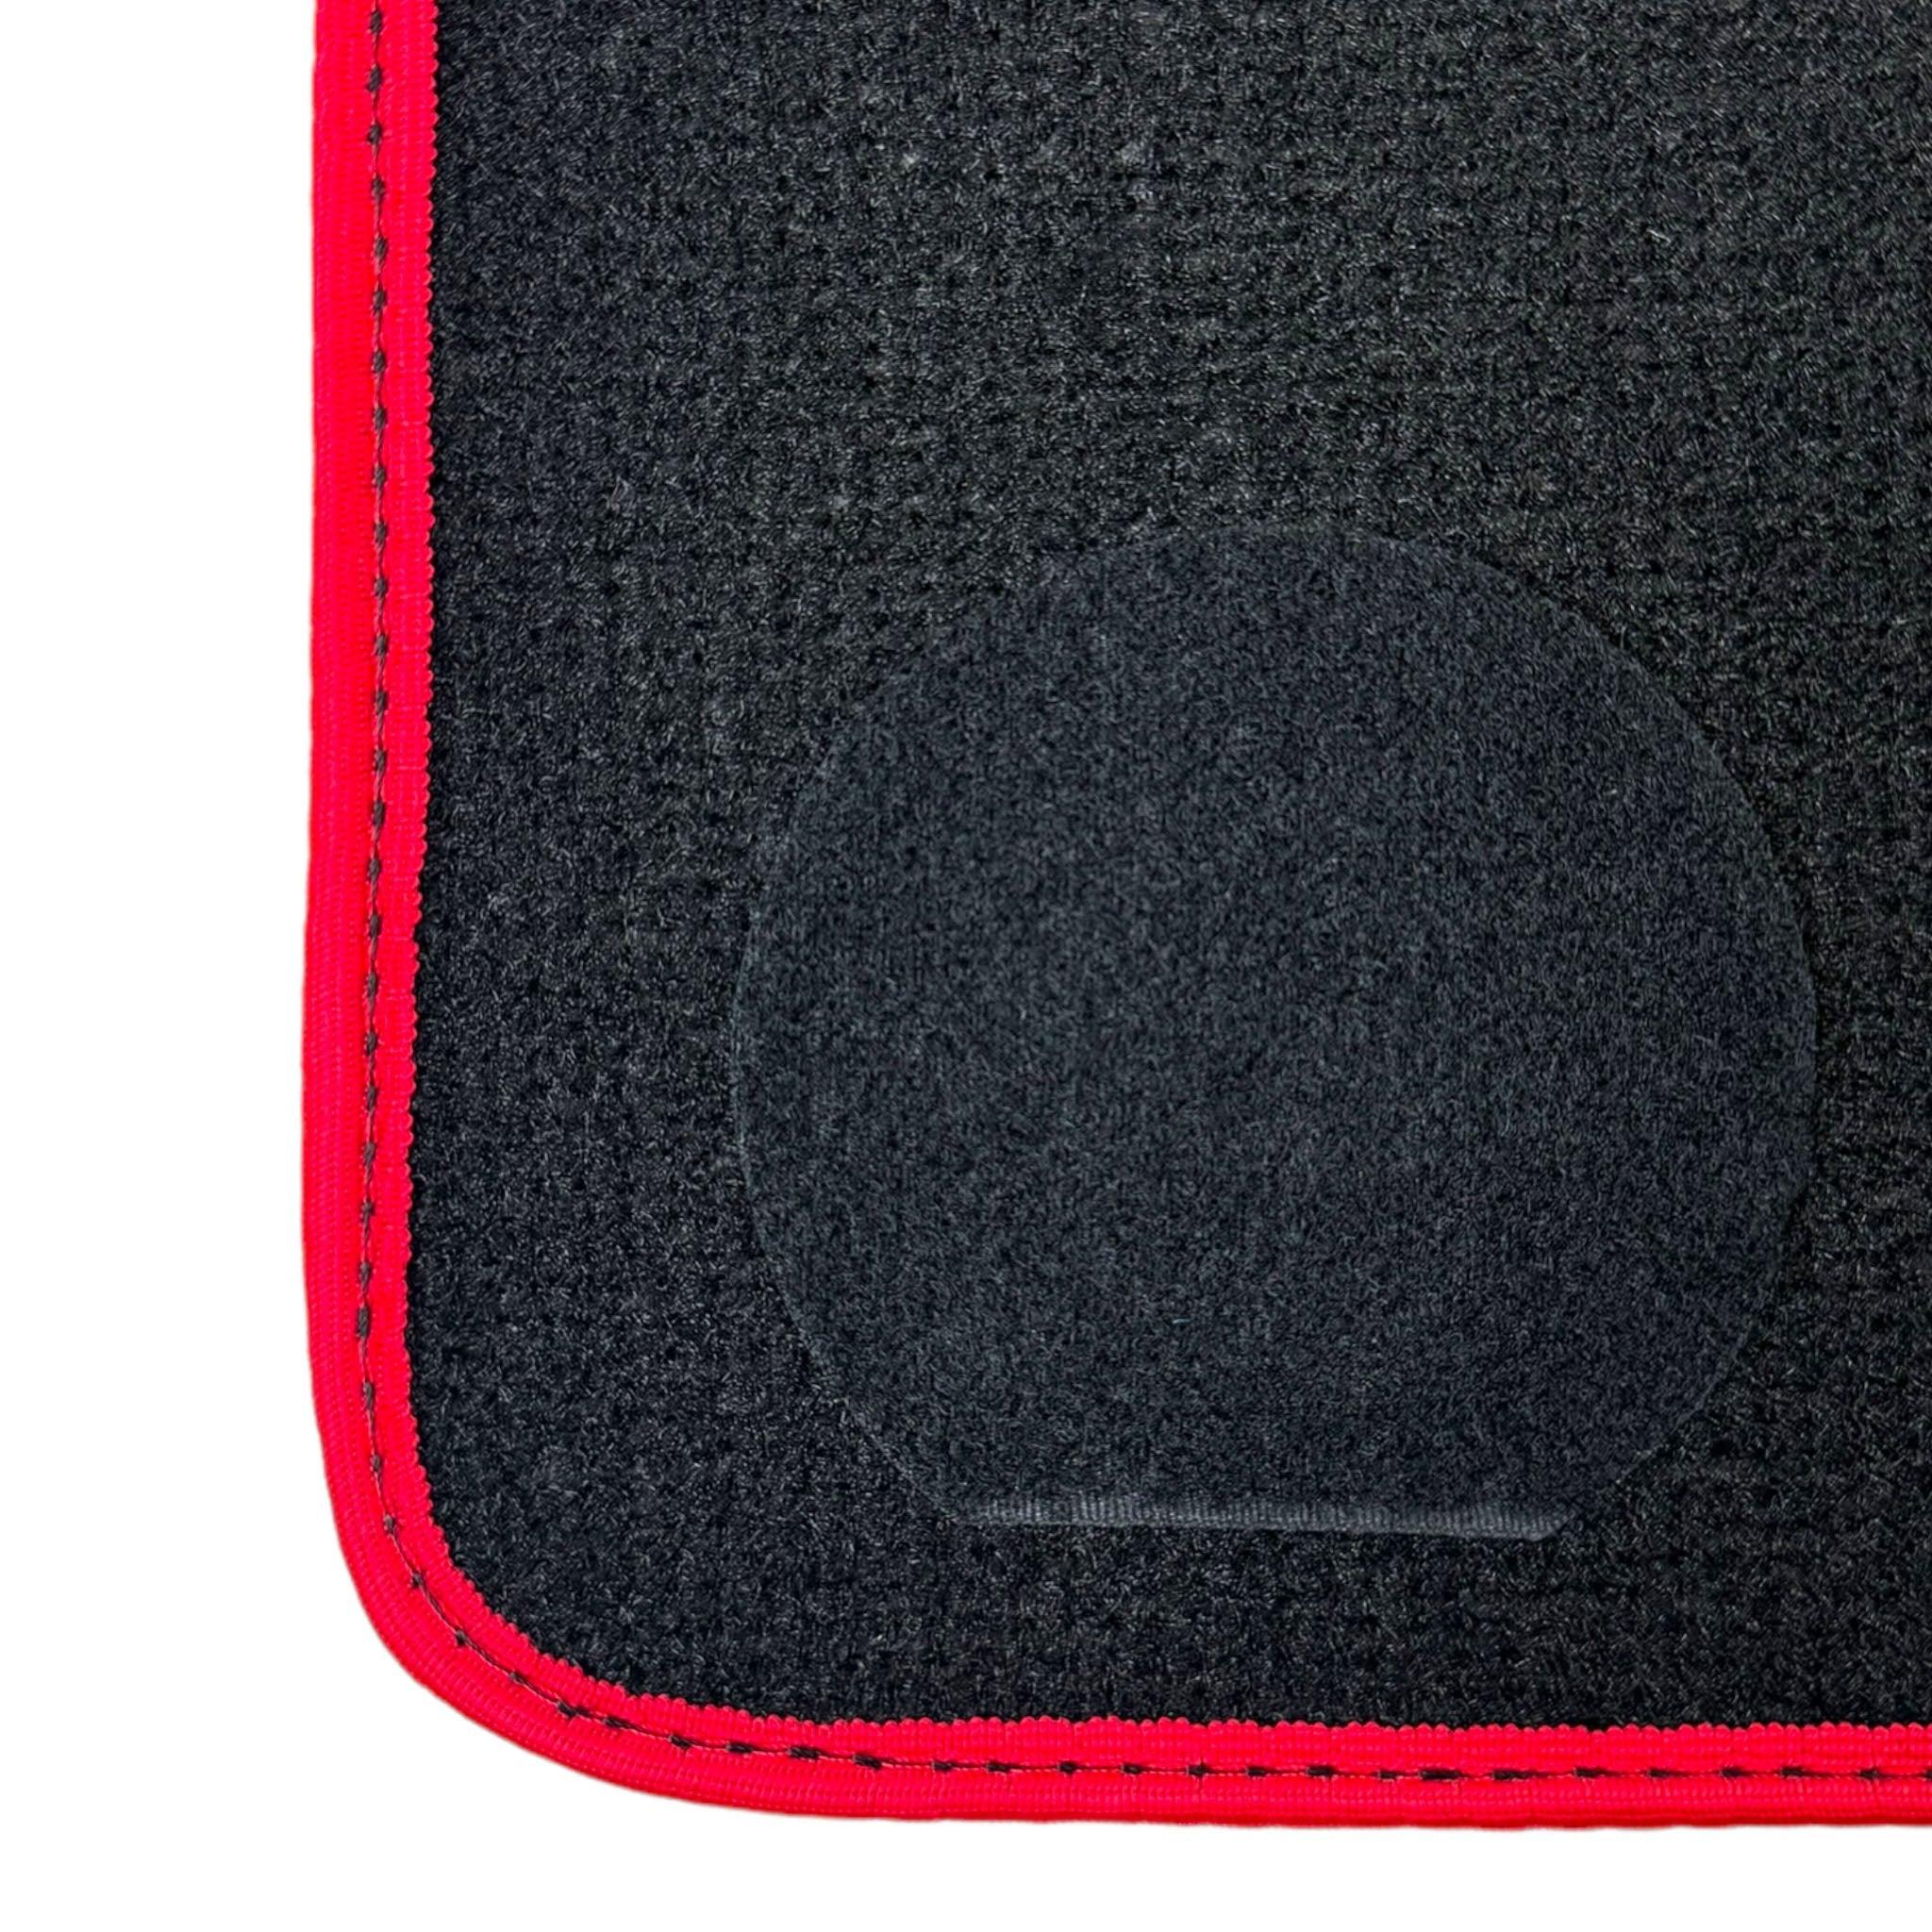 Black Floor Mats For BMW M6 E63 Coupe | Red Trim